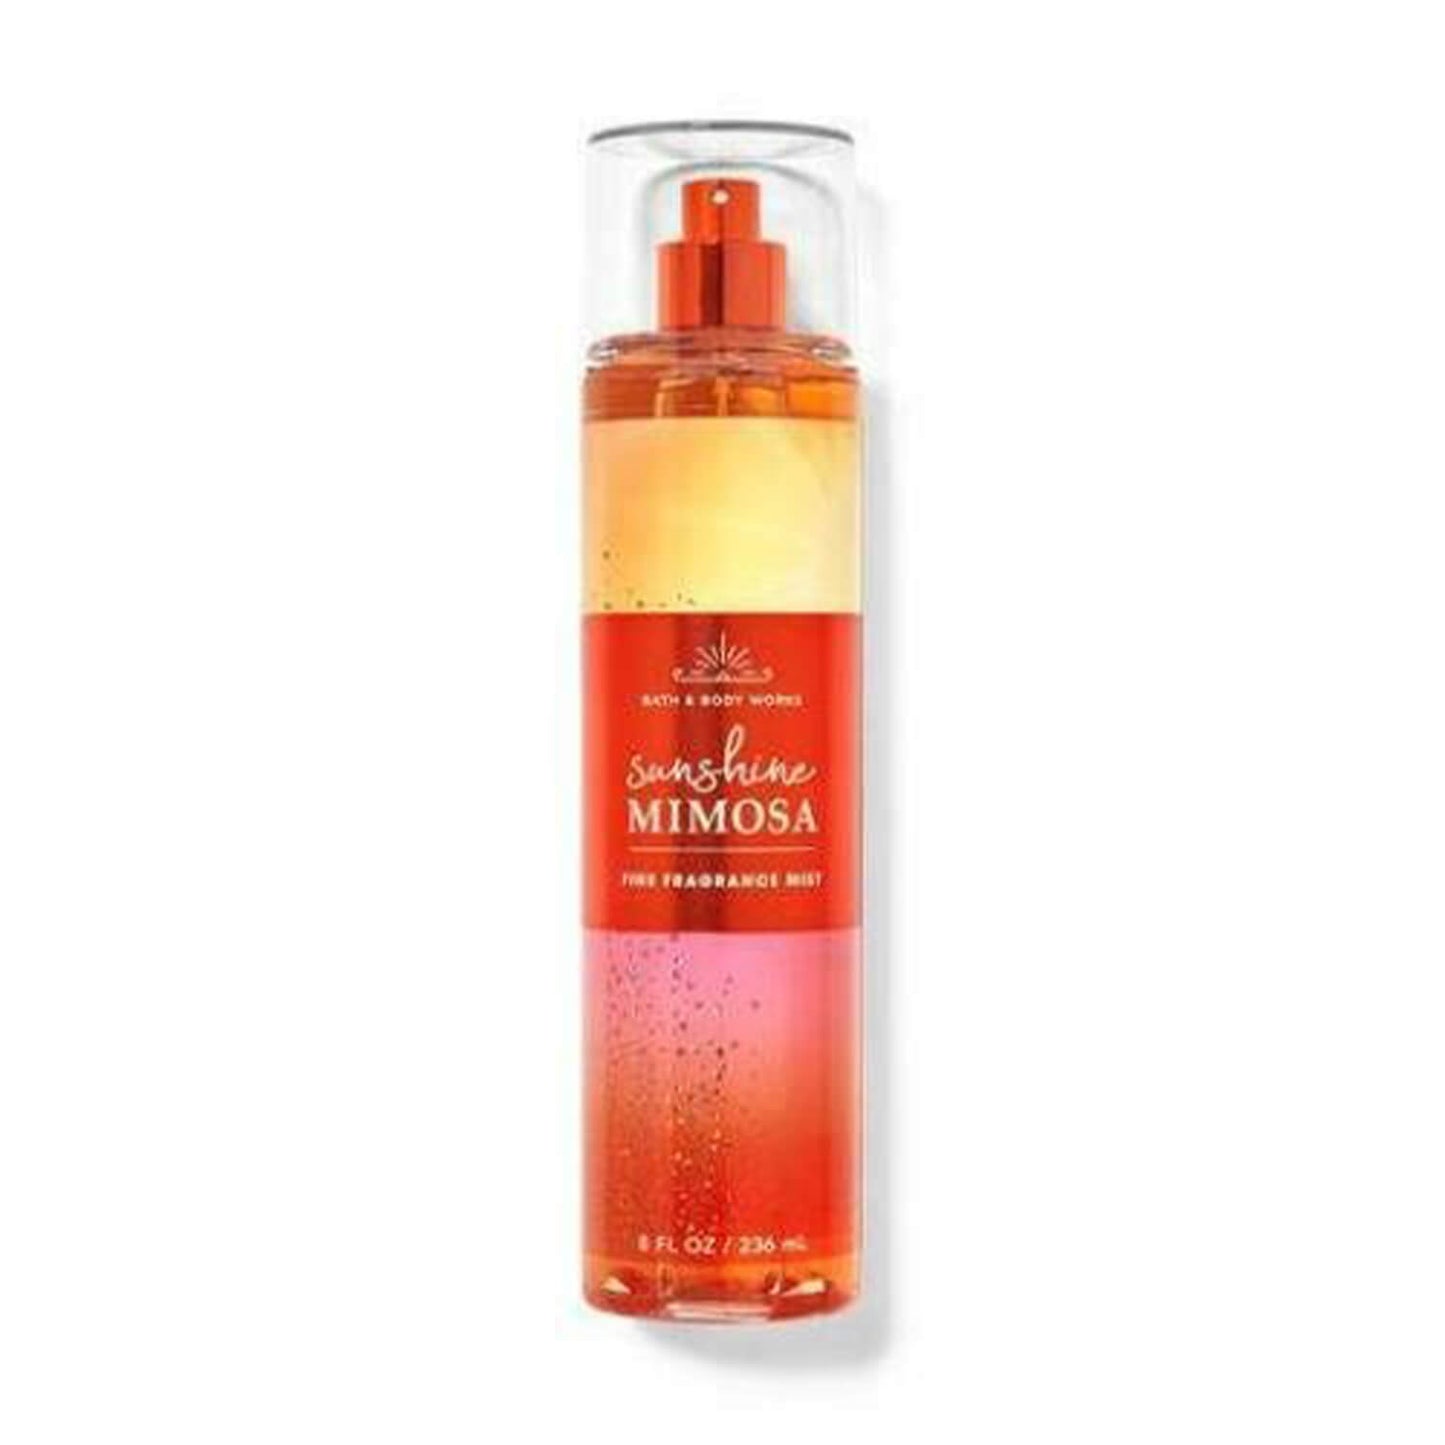 Bath and body works mist sunshine mimosa available at heygirl.pk for cash on delivery in Pakistan